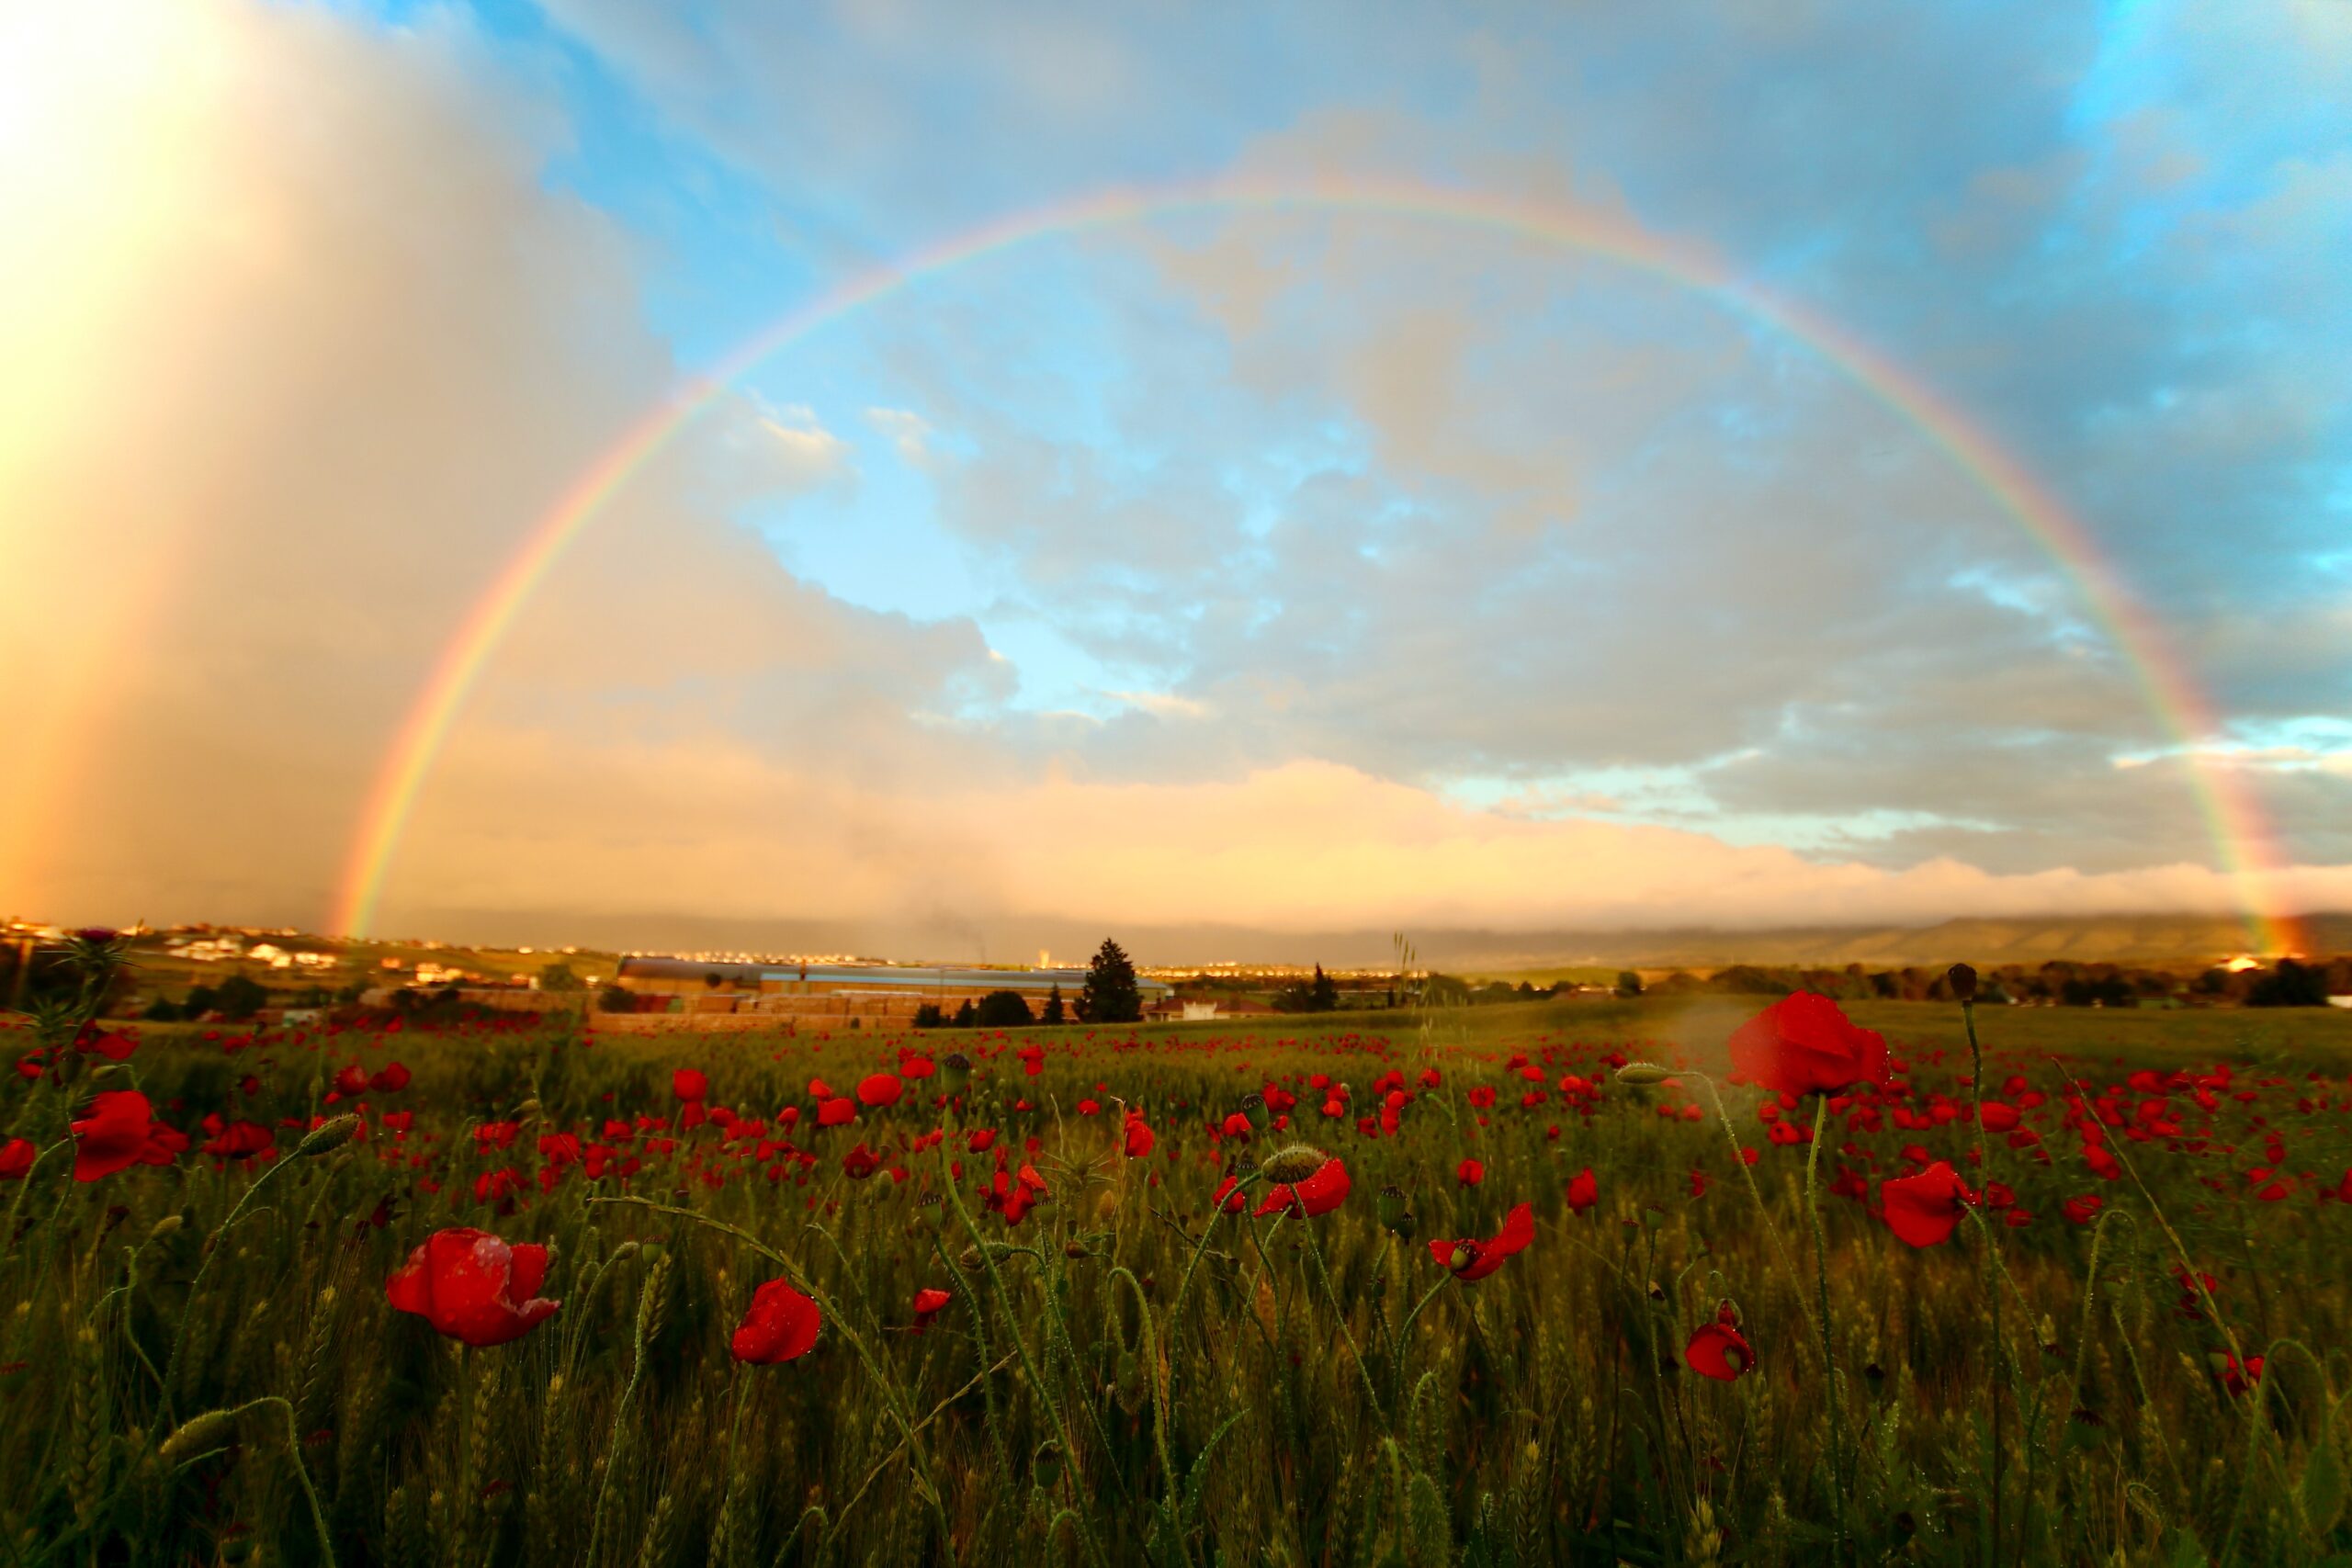 A rainbow over a field of red flowers.